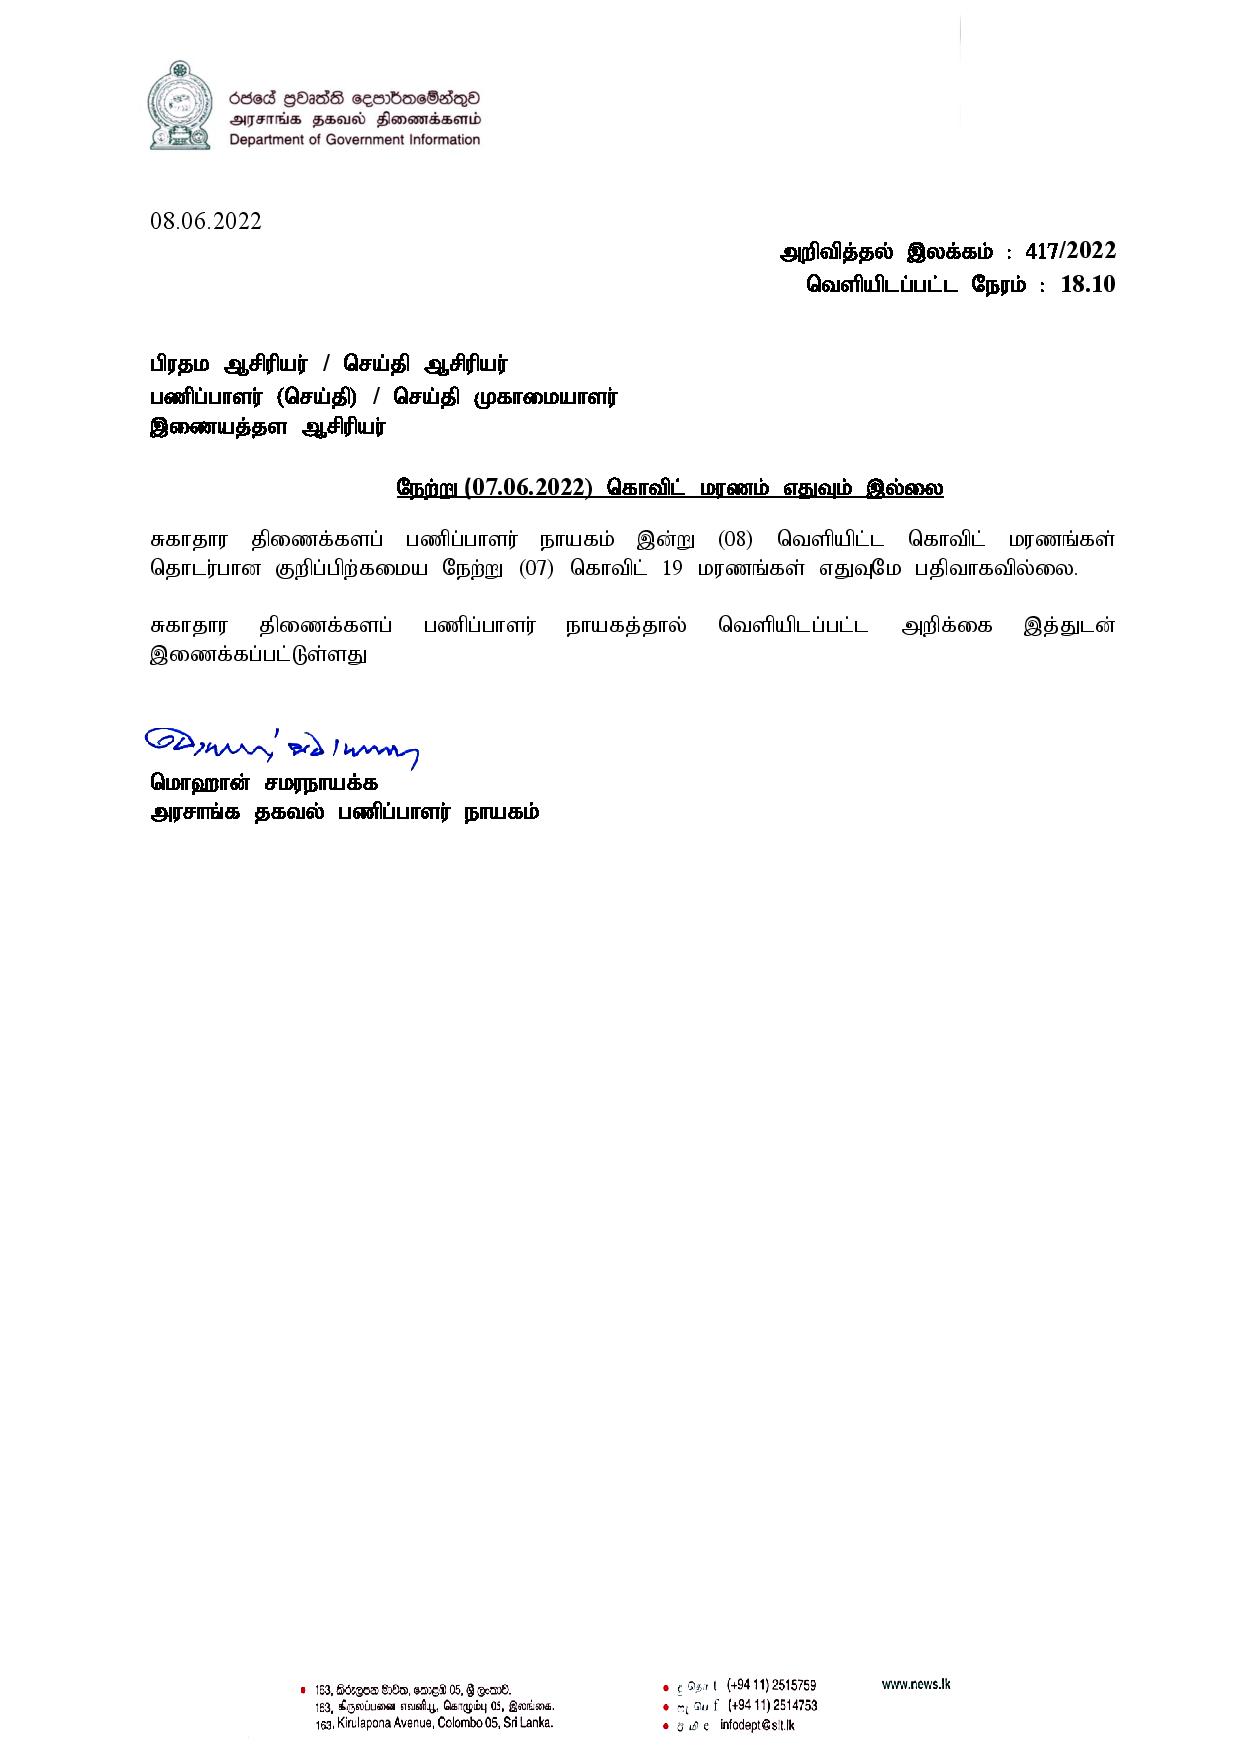 Release No 417 Tamil page 001